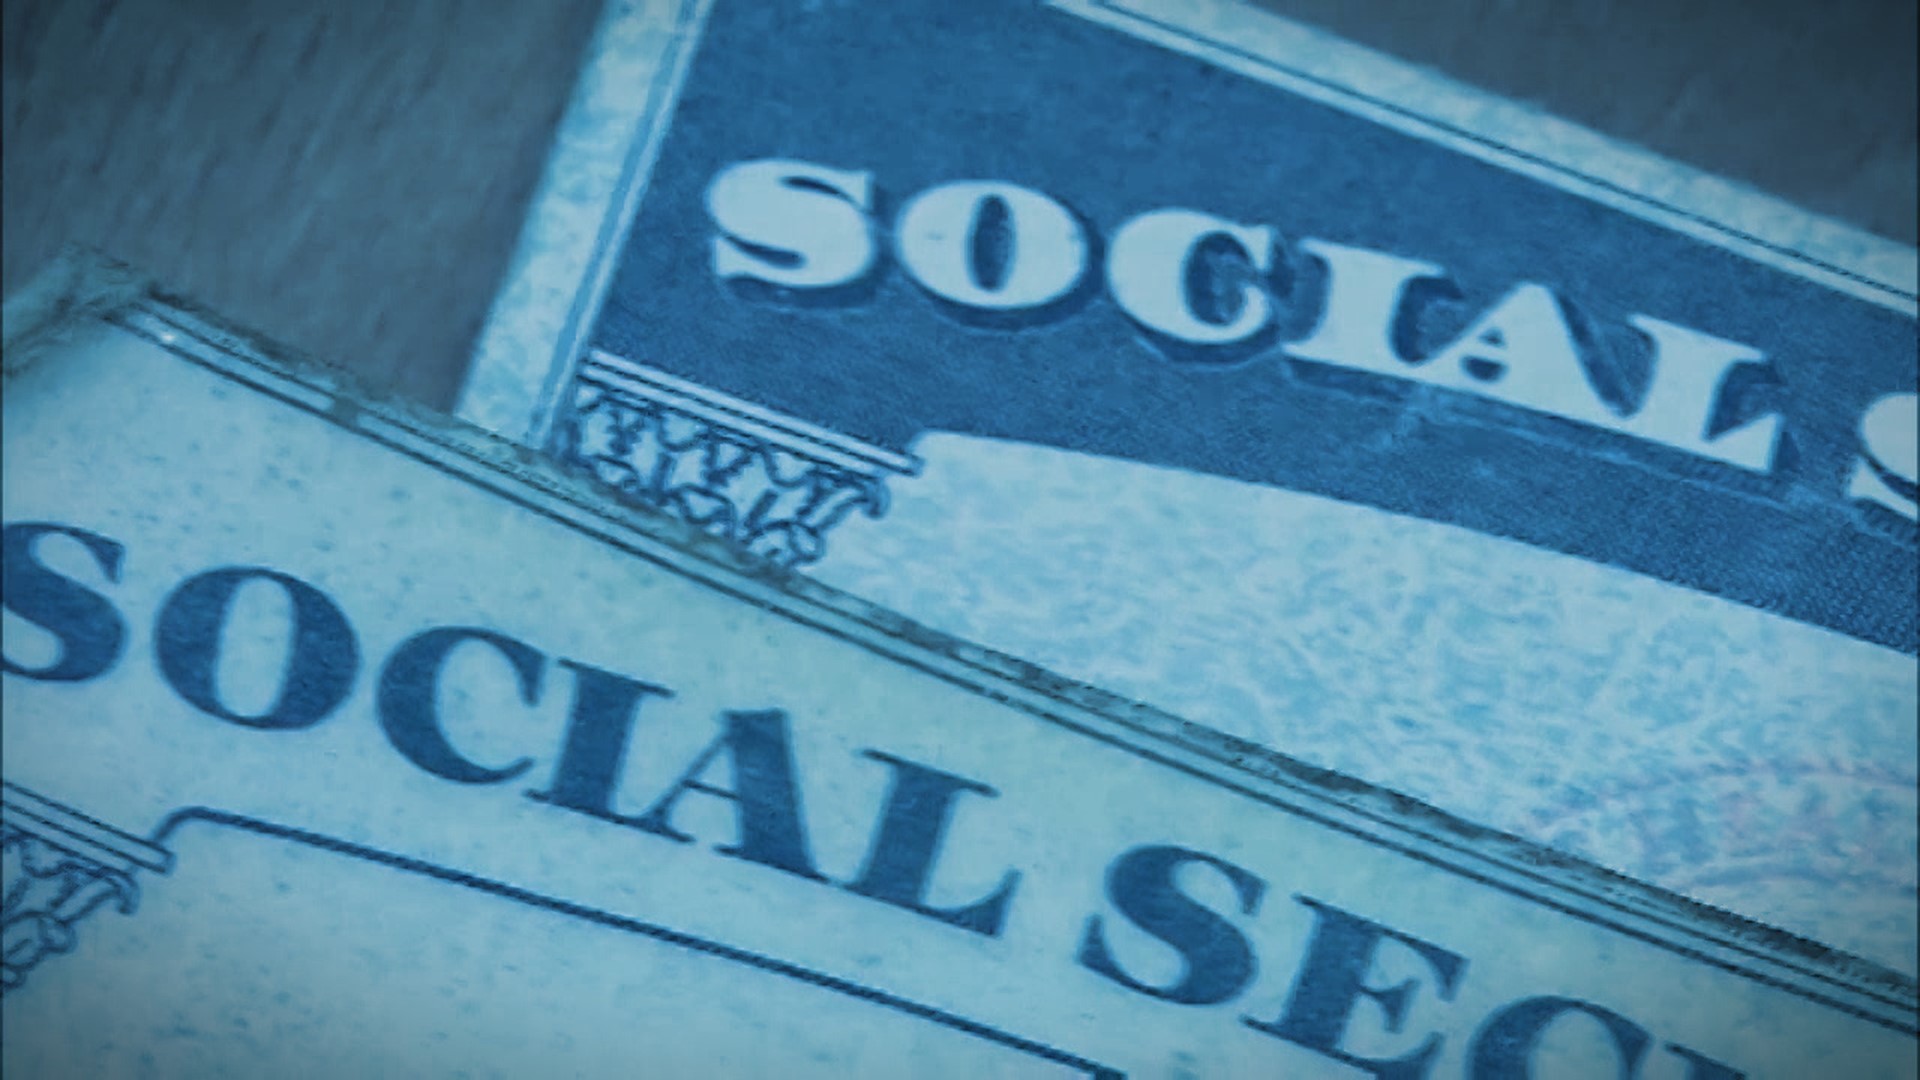 Social security checks will be going up next year at a rate not seen since the early 1980s, welcome news for anyone receiving the benefits.